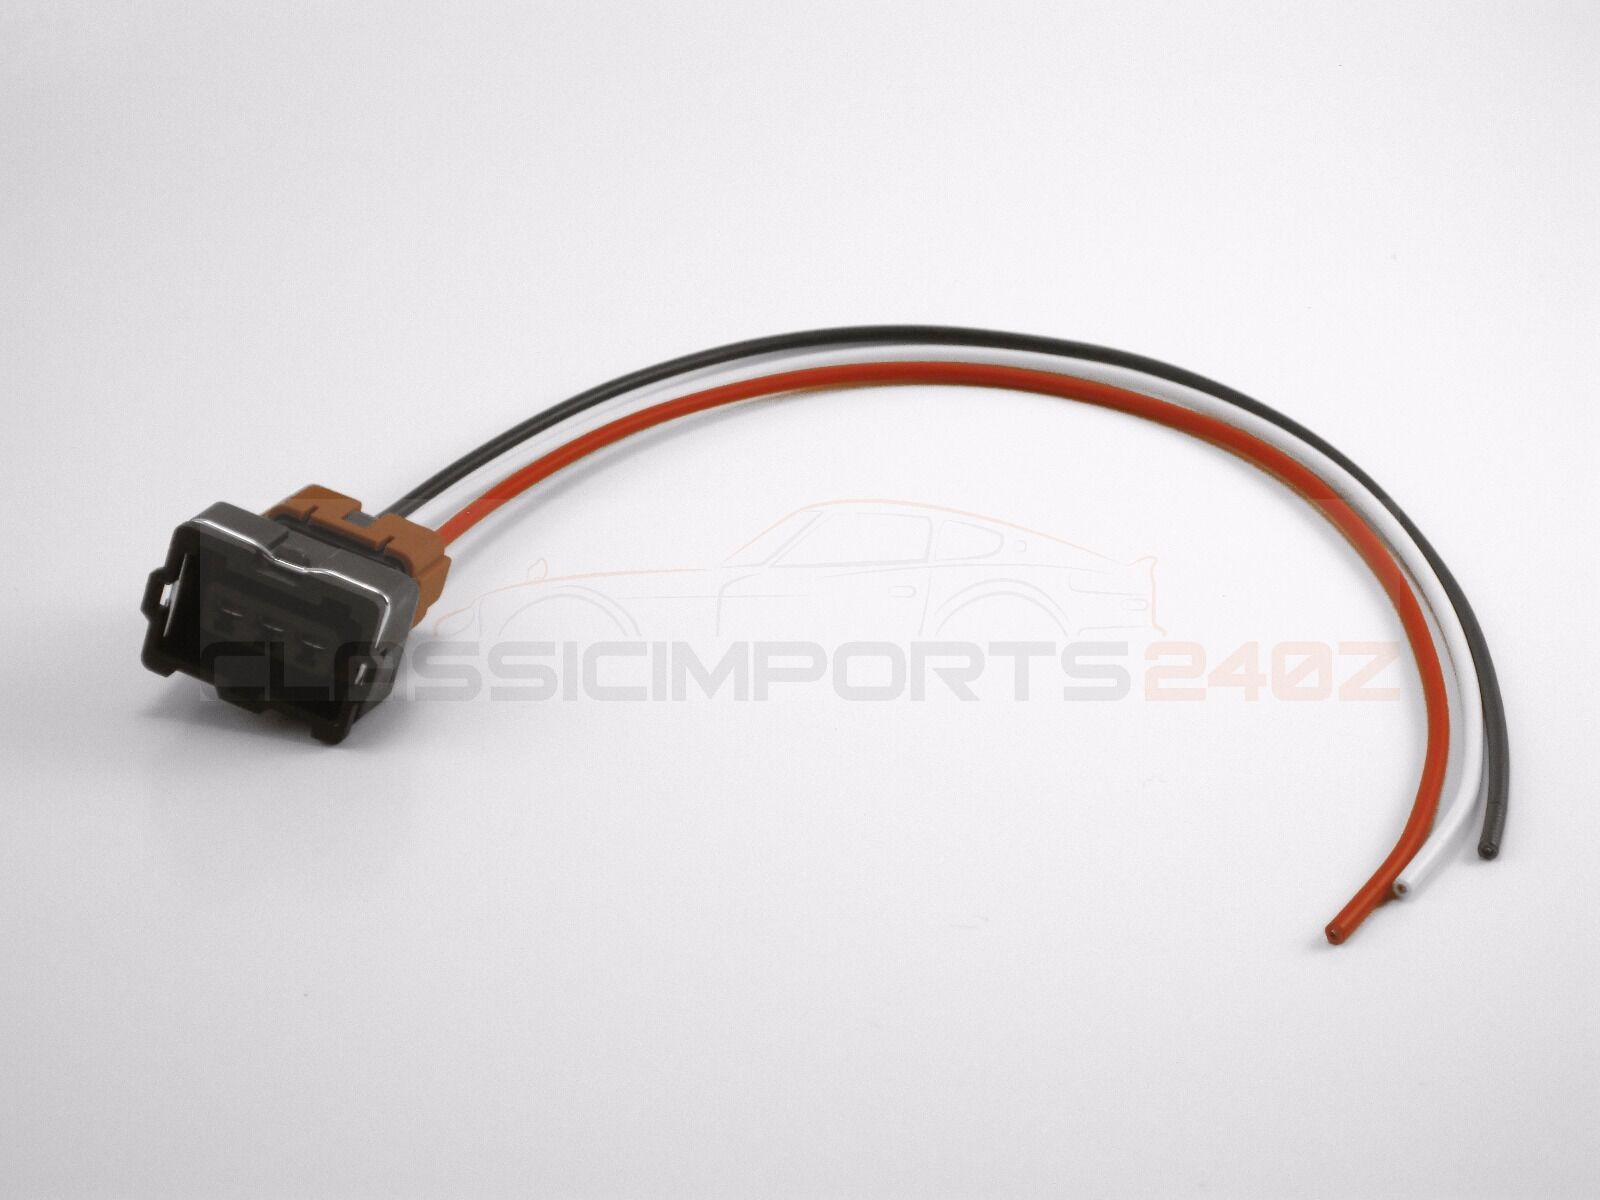 Throttle Position Sensor TPS Wiring Harness Connector Plug for 280z 280zx 300zx